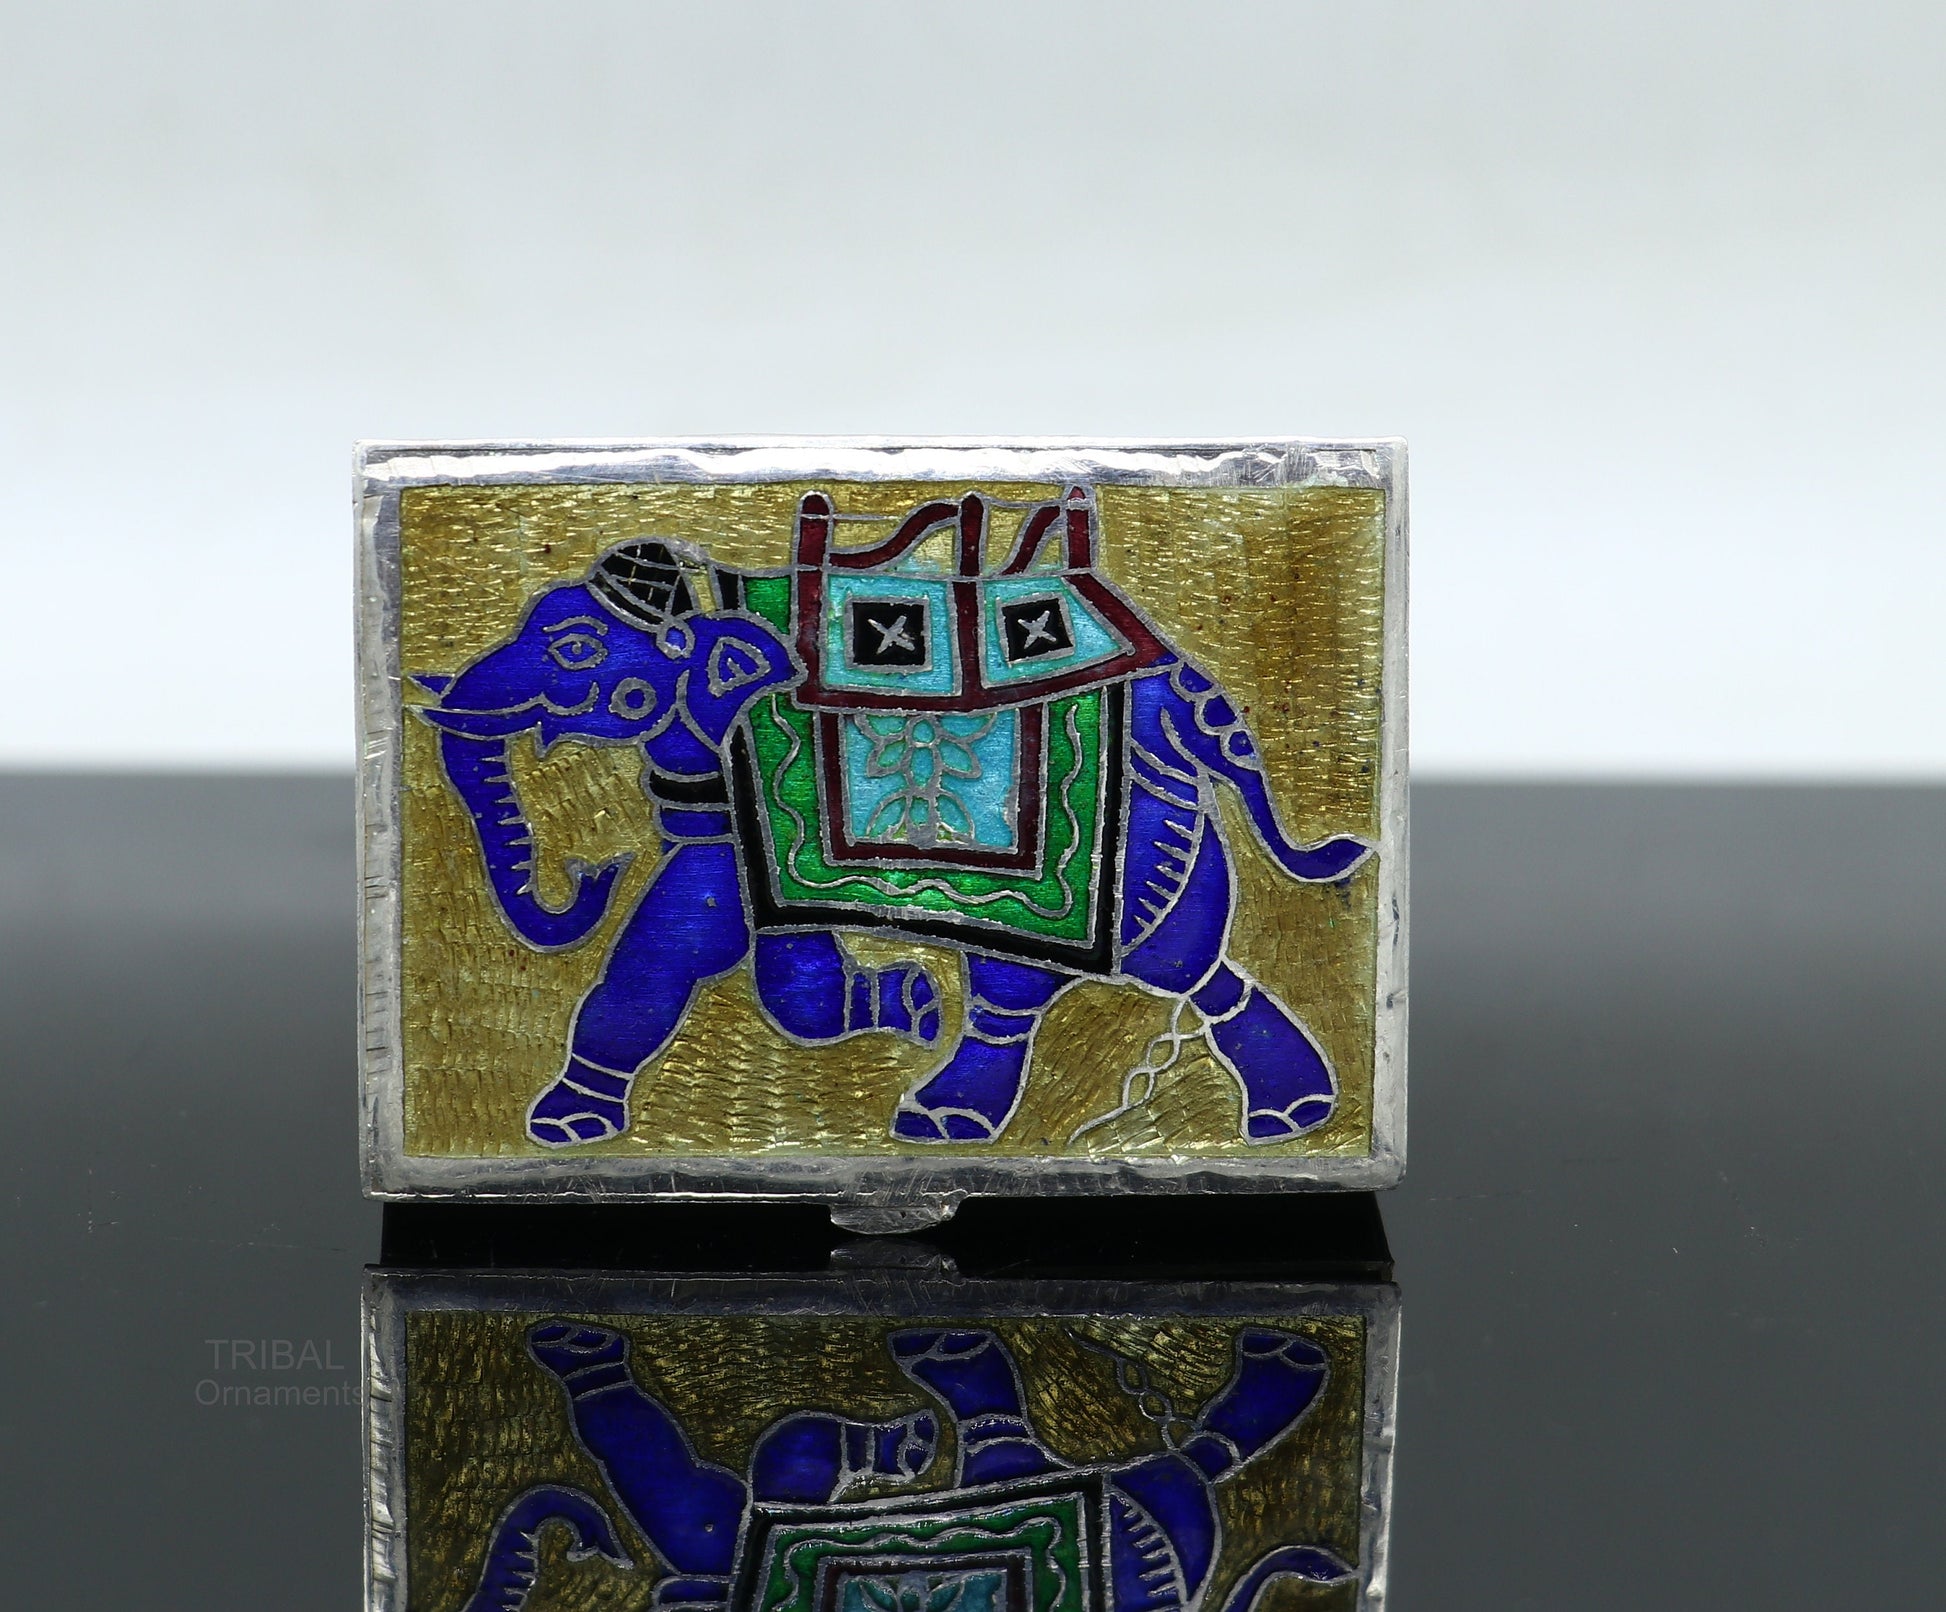 925 Sterling silver handmade trinket box, solid container box, casket box, sindoor box, enamel elephant work customized gifting box stb335 - TRIBAL ORNAMENTS